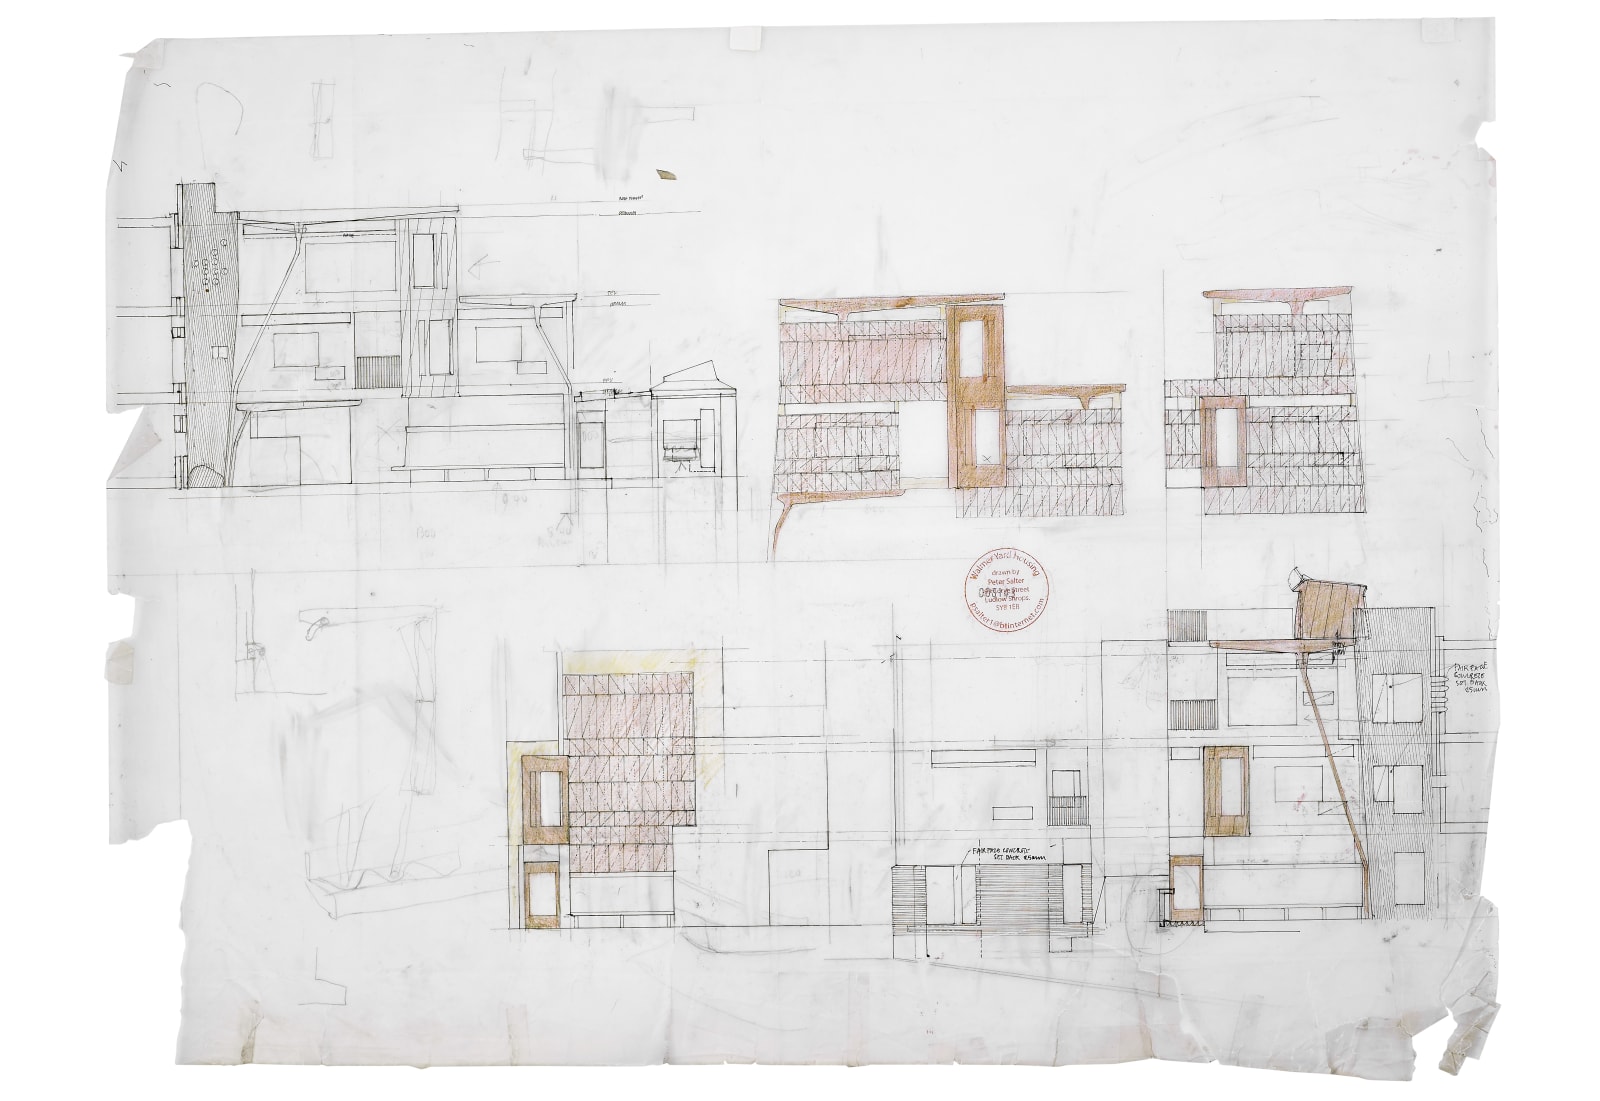 Peter Salter, Preliminary courtyard elevations, showing shutters & gutters (1:50), 2010